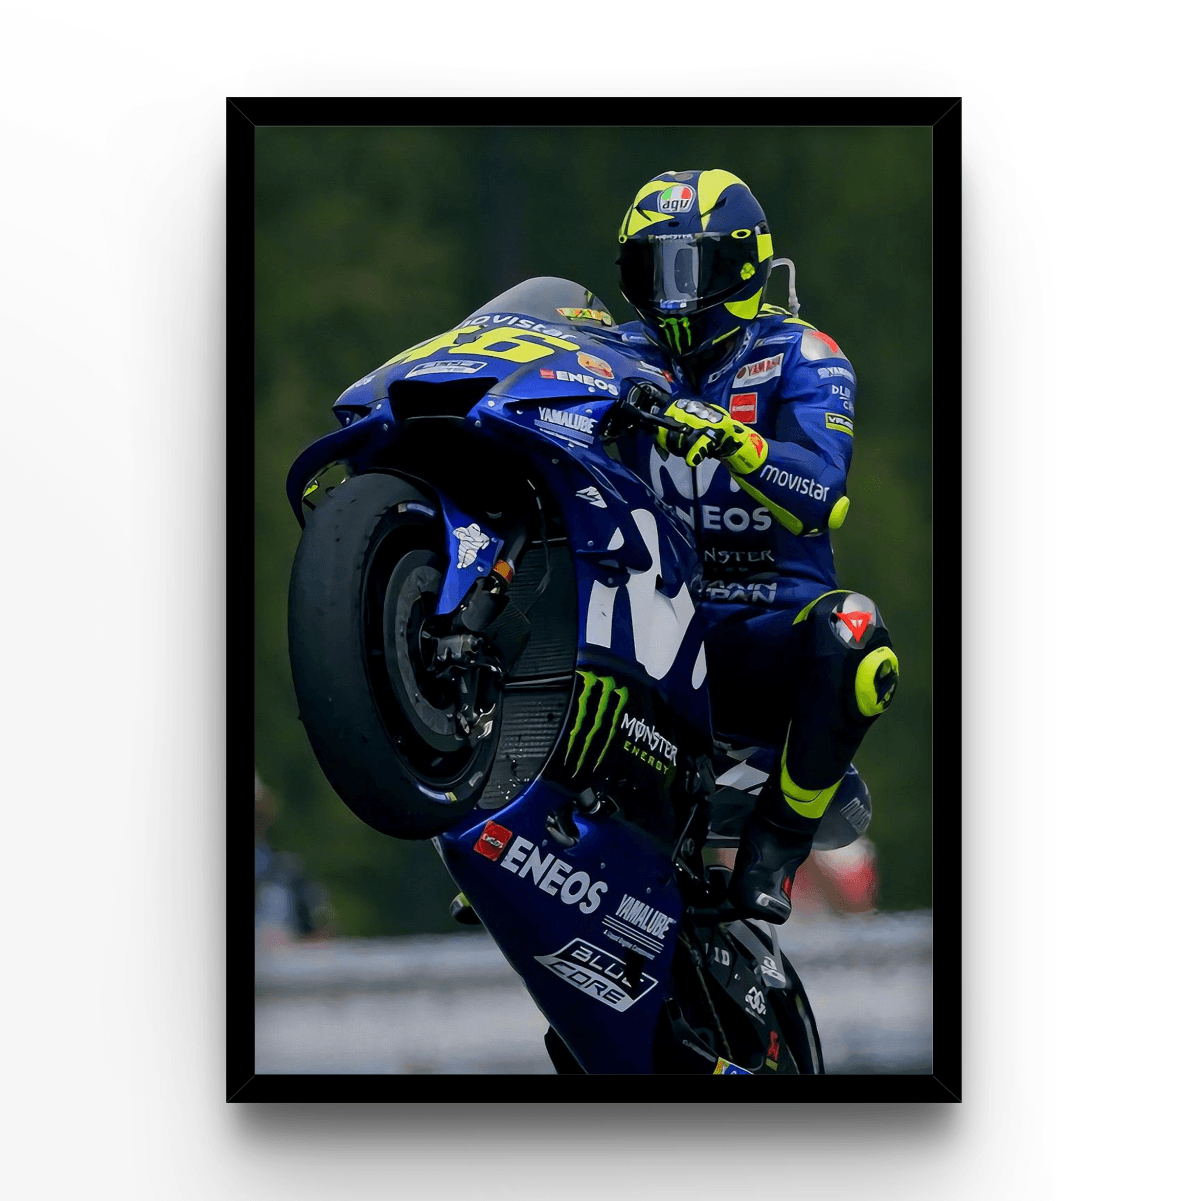 Valentino Rossi 4 - A4, A3, A2 Posters Base - Poster Print Shop / Art Prints / PostersBase